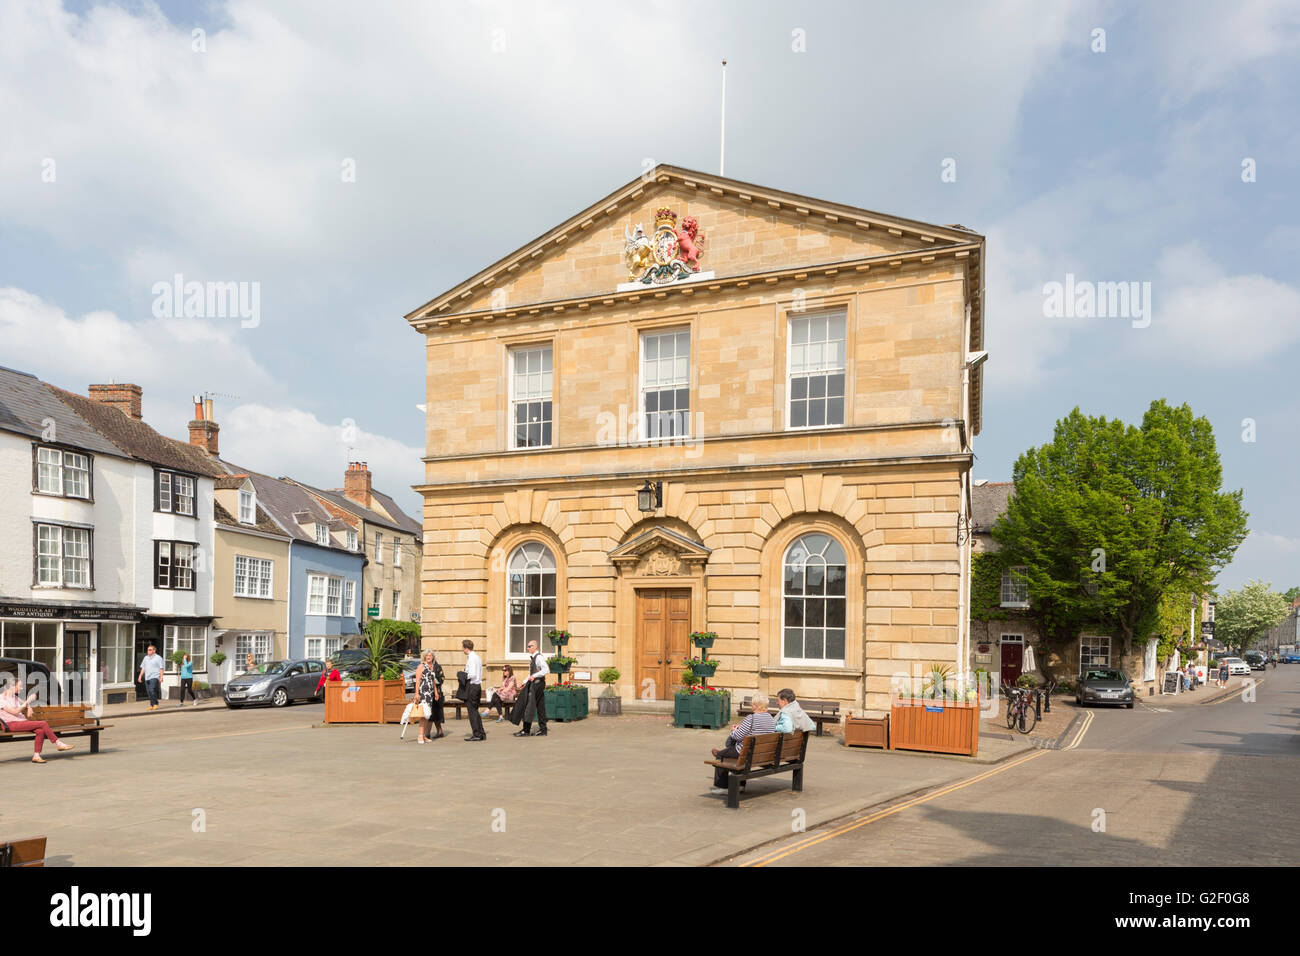 The historic town of Woodstock, Oxfordshire, England, UK Stock Photo